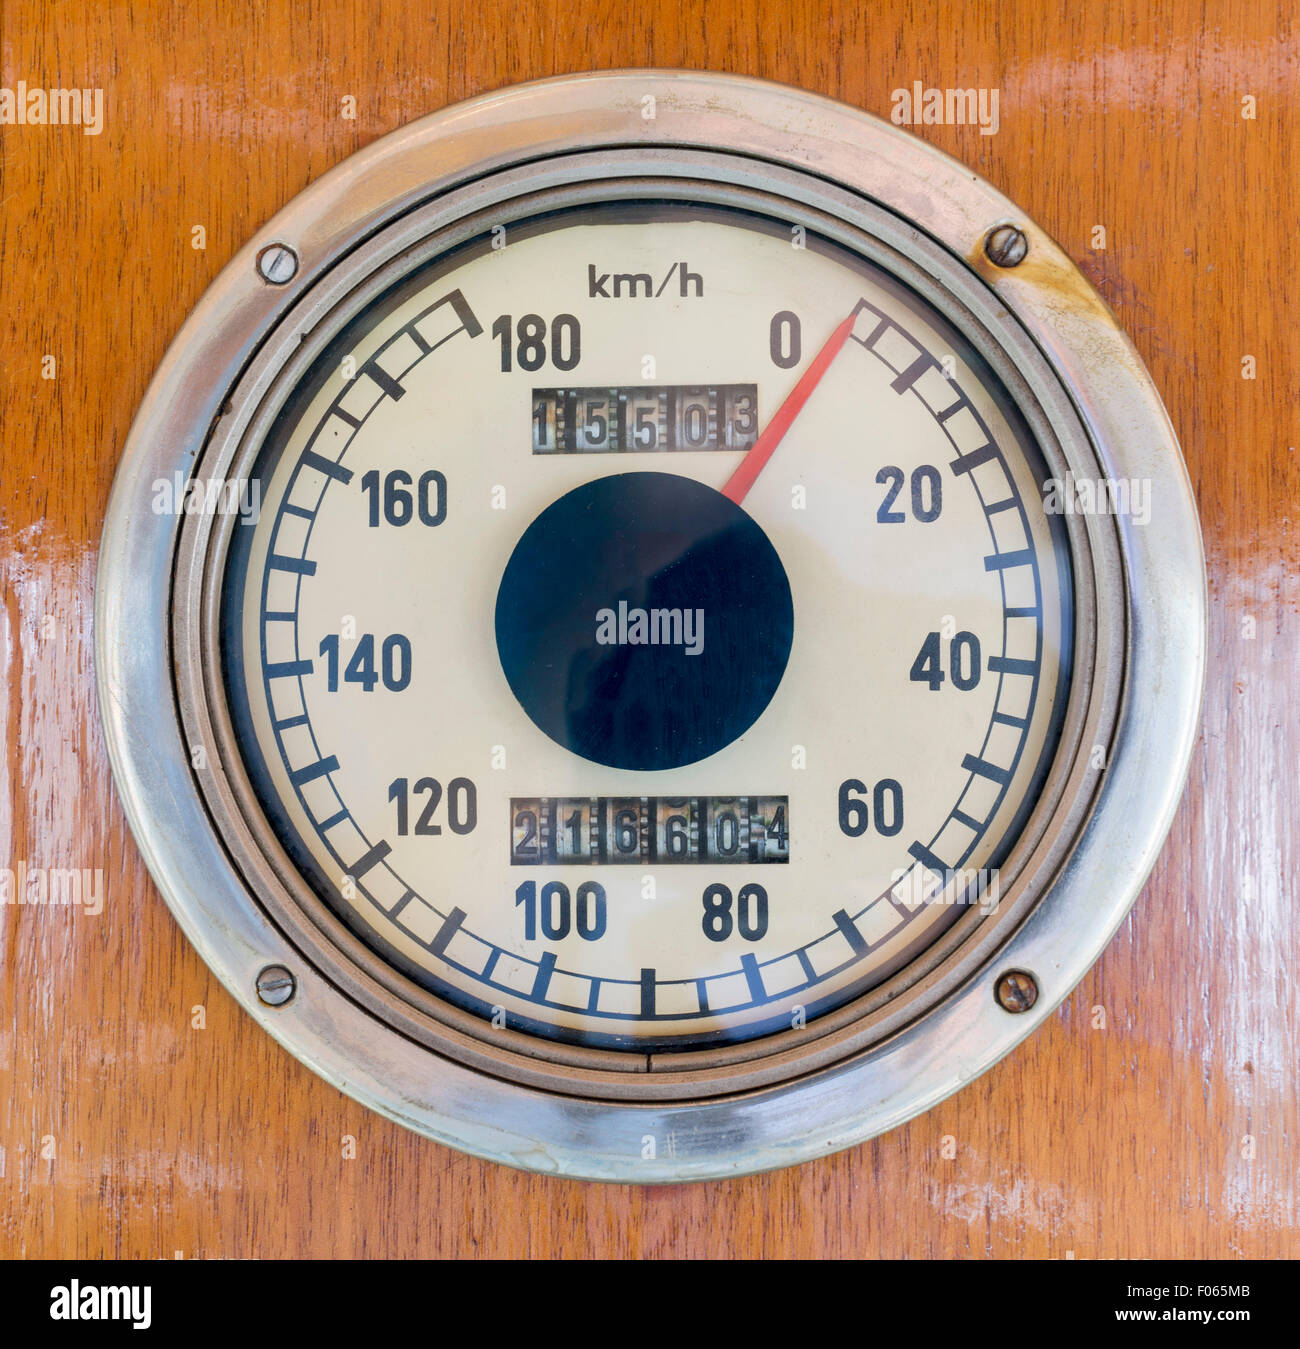 Km/h speedometer in an old-fashioned luxurt train car. Stock Photo